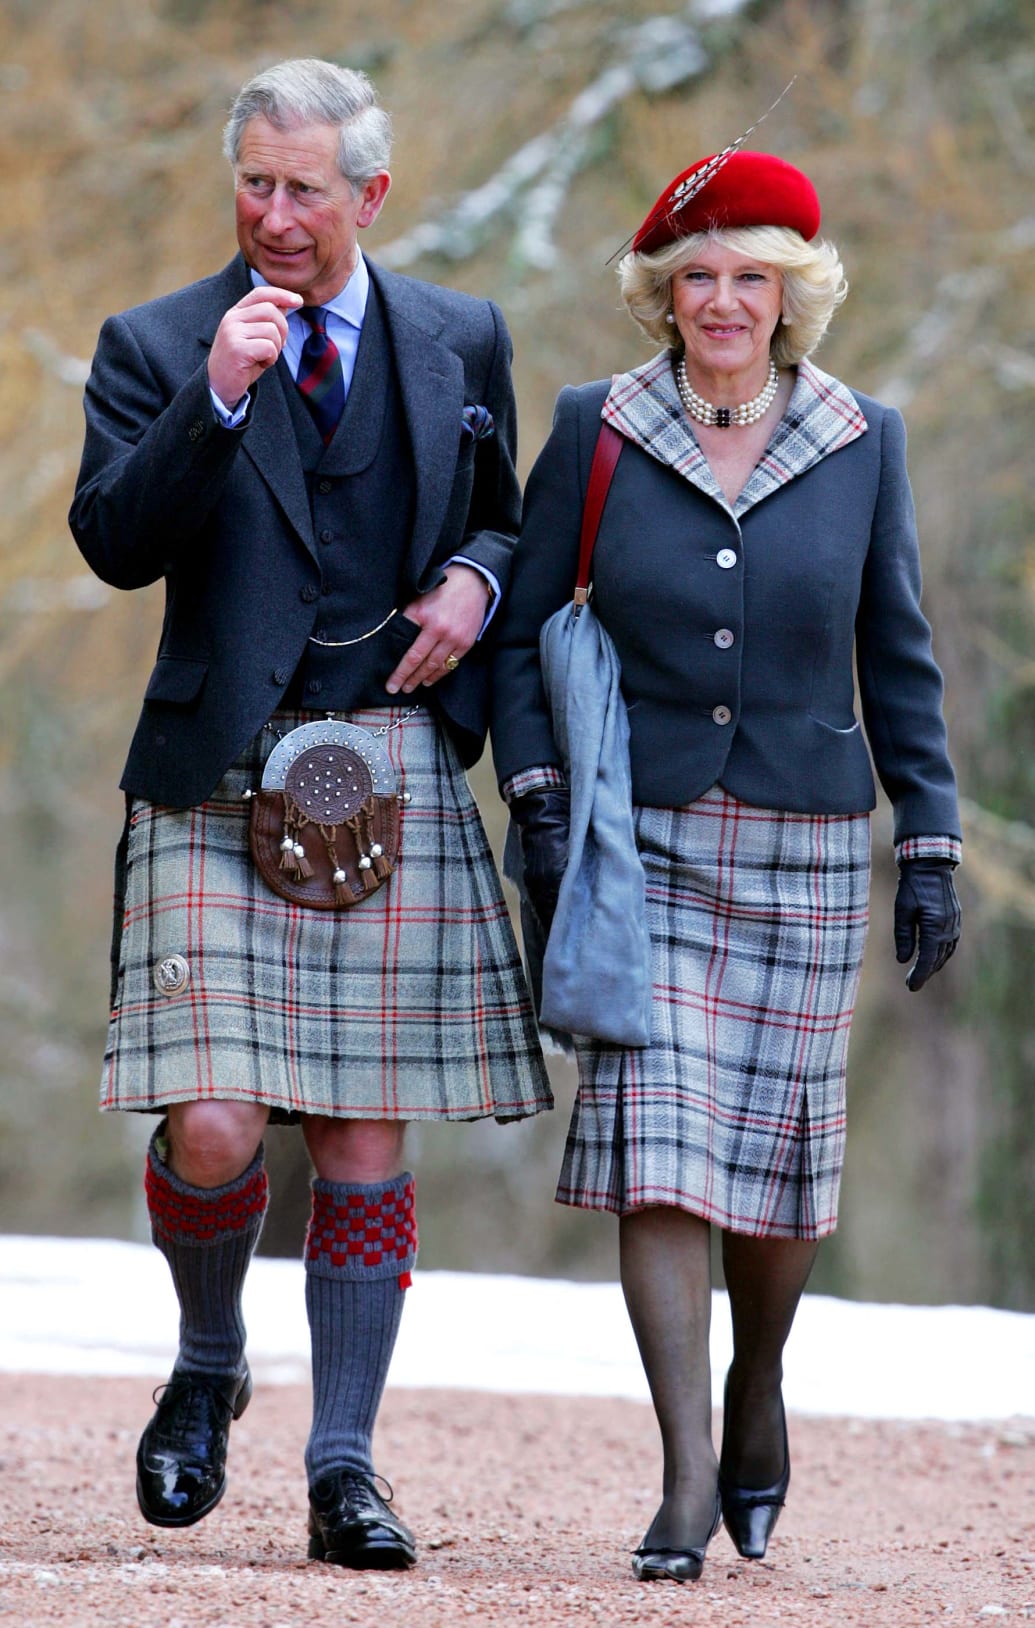 Britain's Prince Charles and his wife Camilla, Duchess of Cornwall, leave Crathie Church at Balmoral in Scotland, after attending a service on their first wedding anniversary, April 9, 2006.